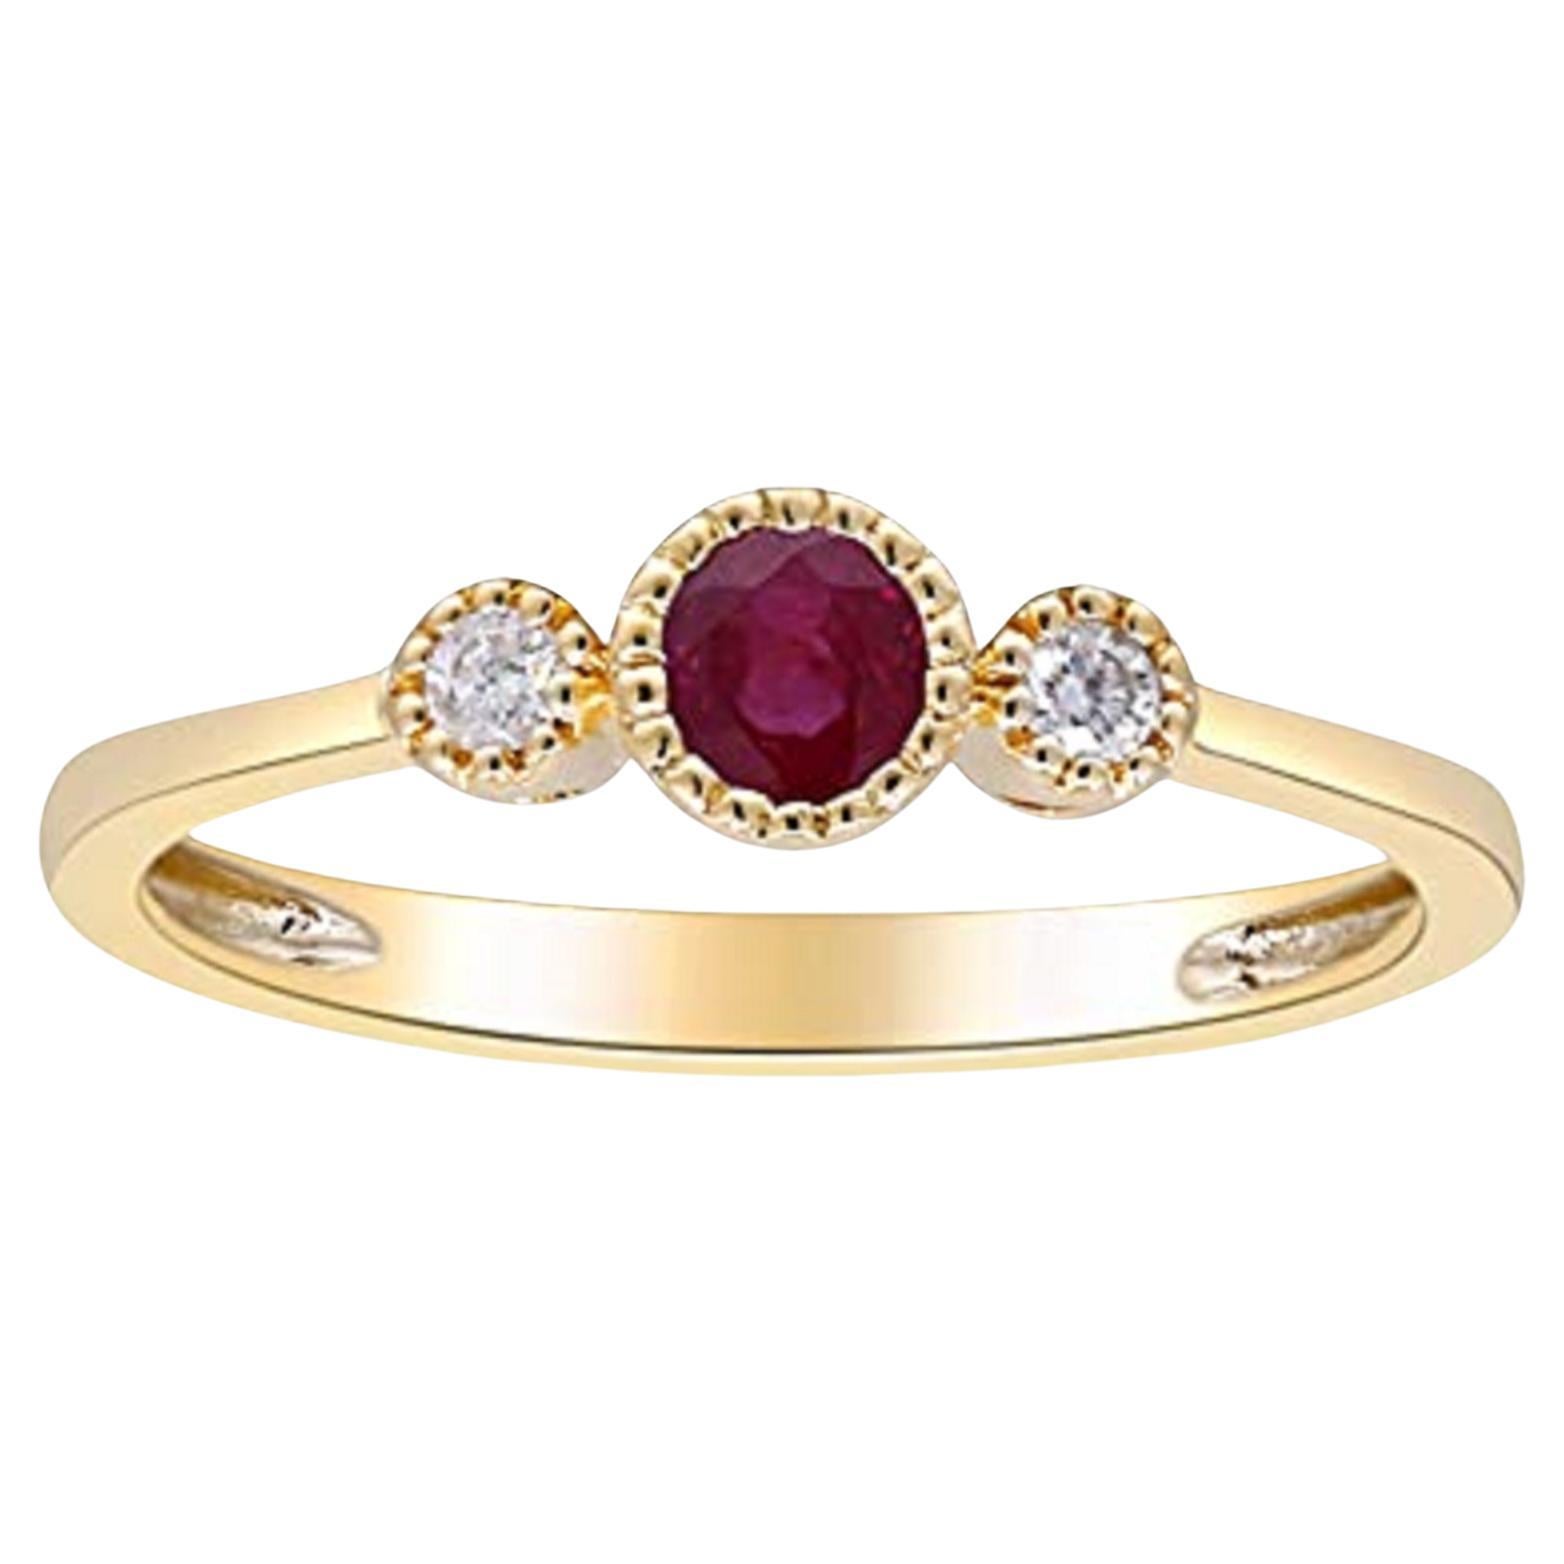  Gin & Grace 10K Yellow Gold Mozambique Ruby Ring with Diamonds for women